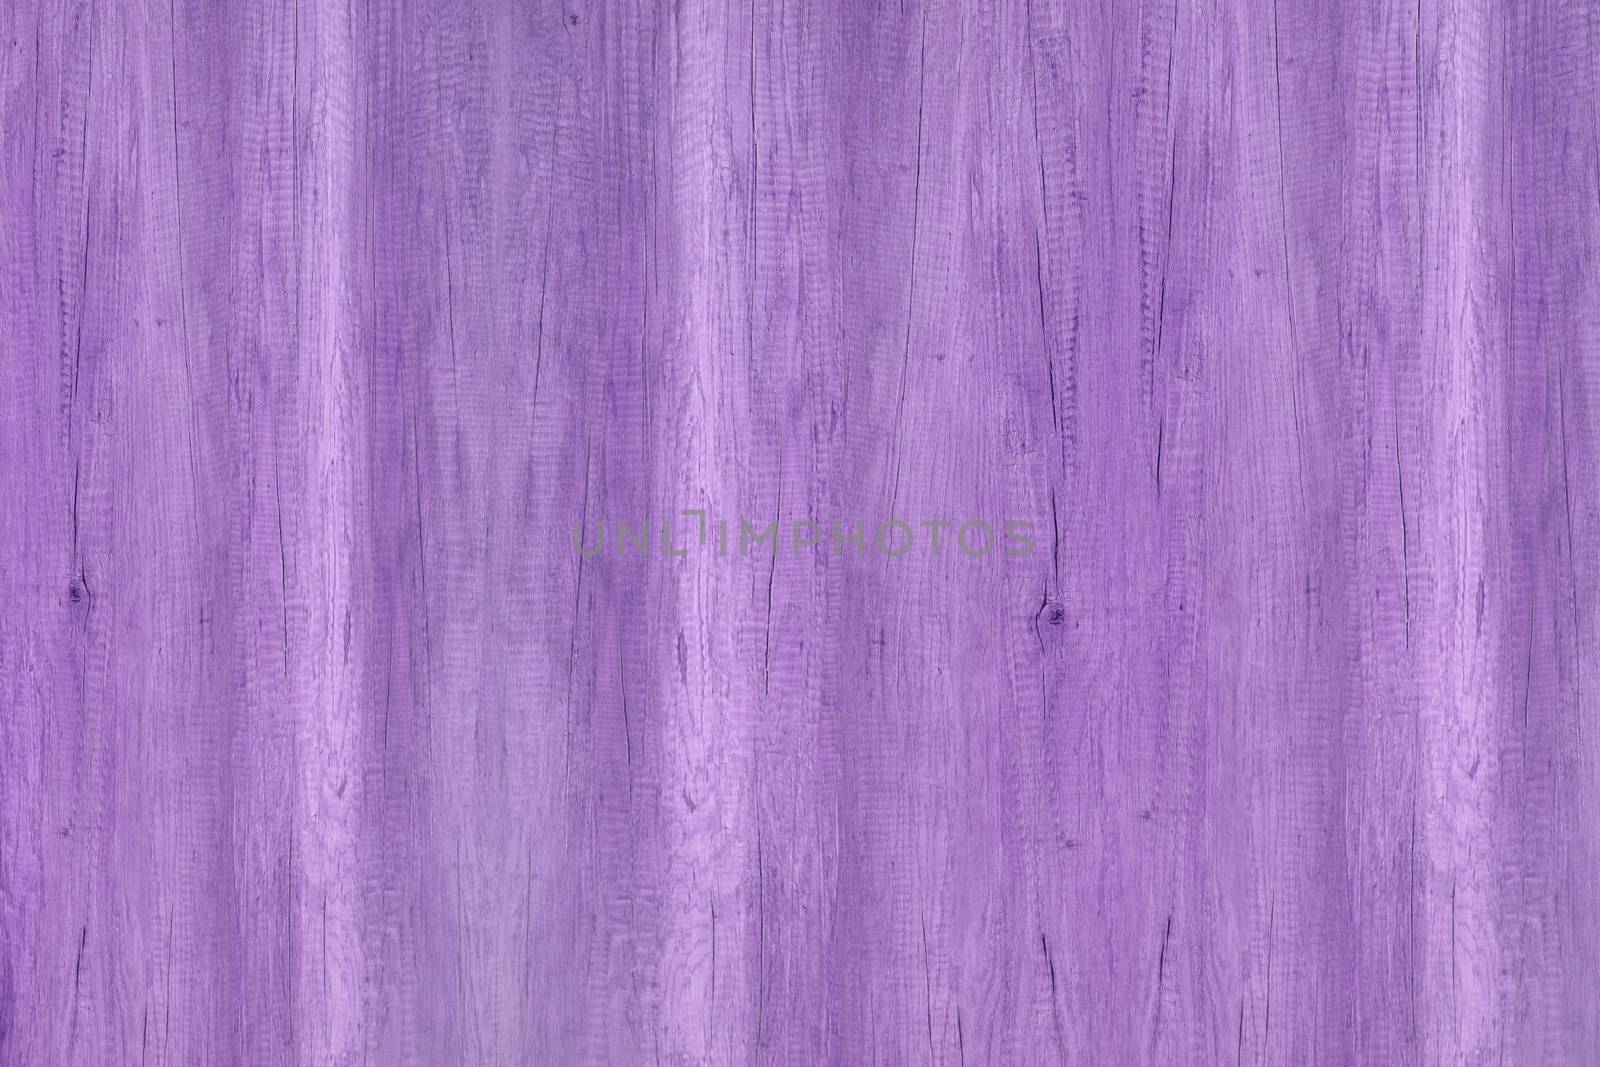 Wood texture with natural patterns, purple wooden texture